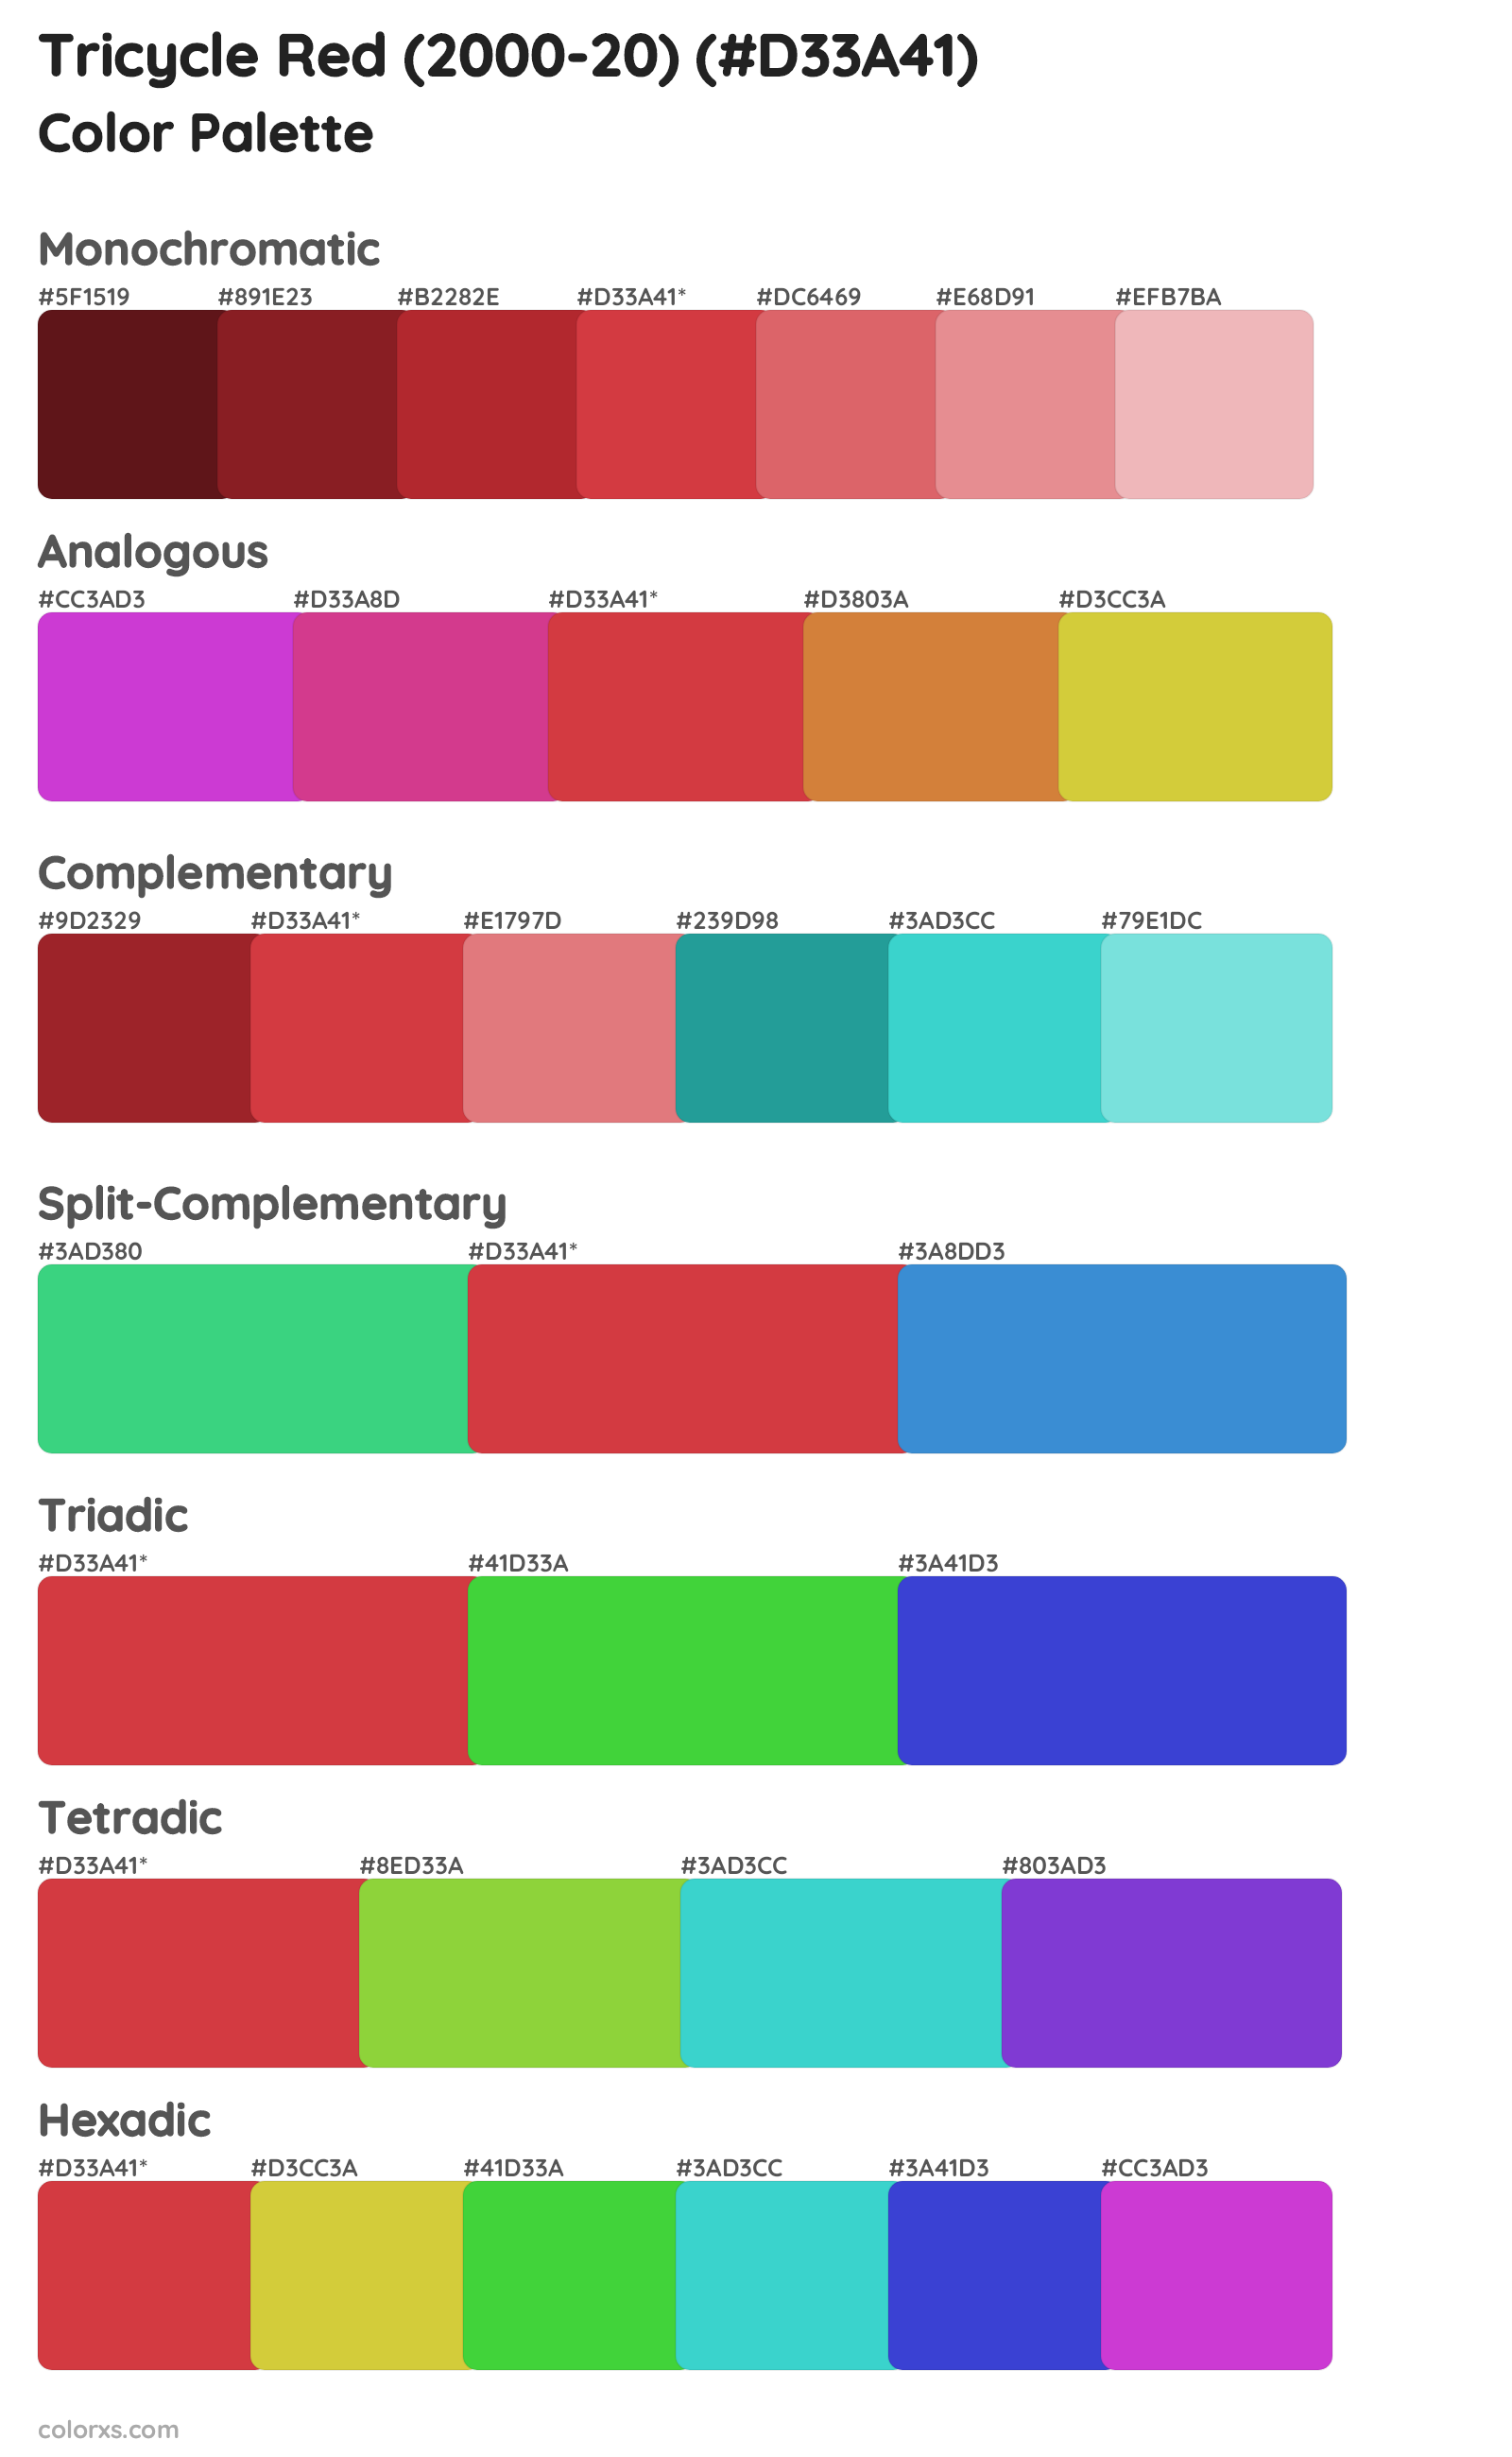 Tricycle Red (2000-20) Color Scheme Palettes